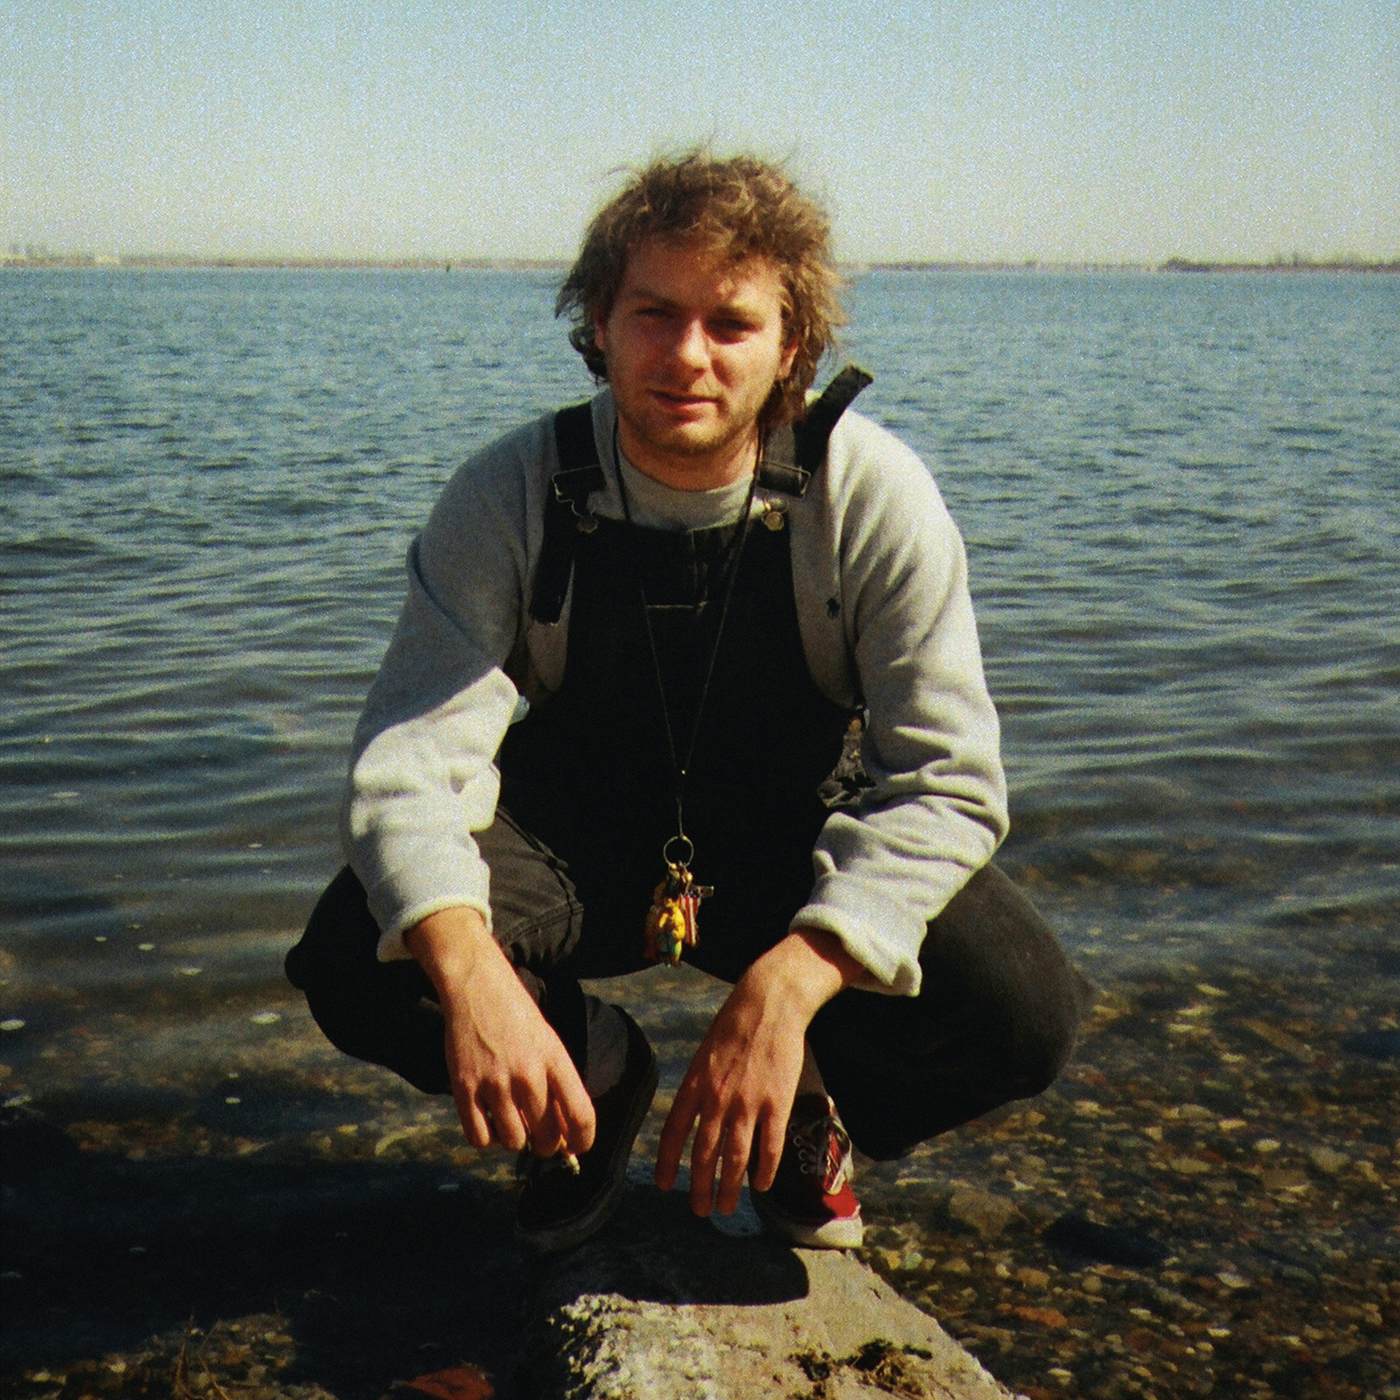 Mac DeMarco ANOTHER ONE CD